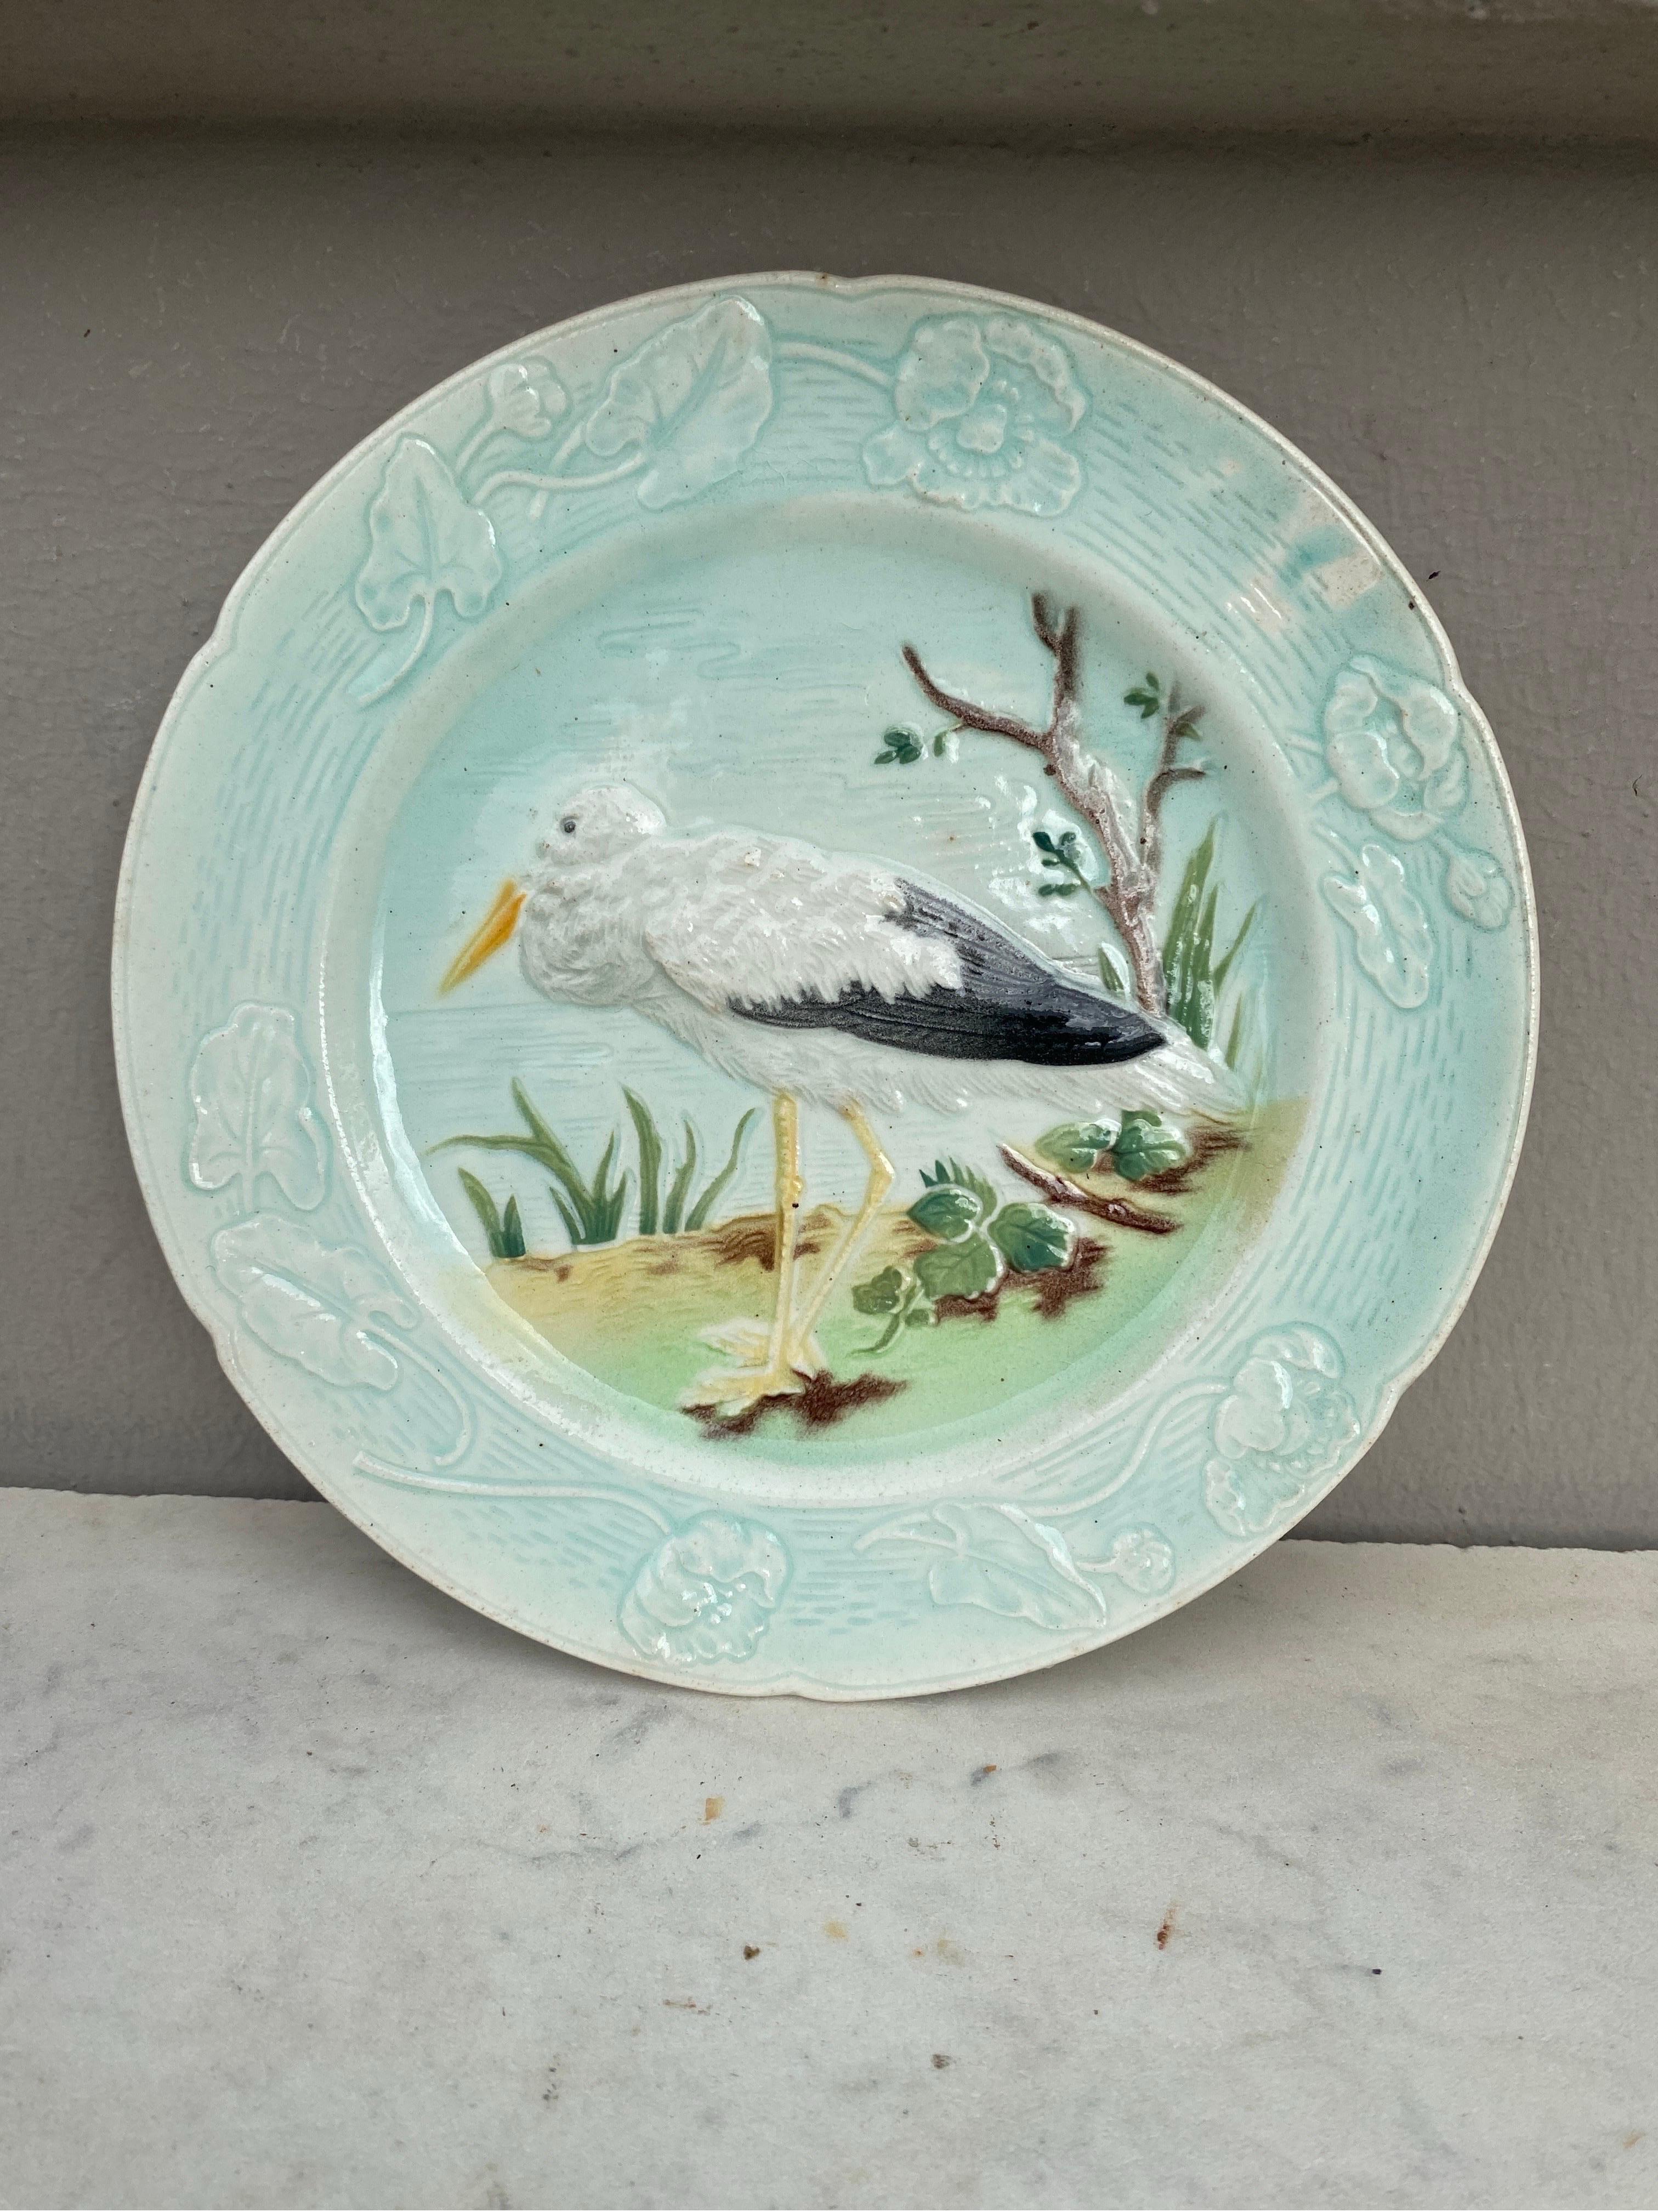 French Majolica Stork Plate Keller & Guerin Saint Clement, Circa 1900
Border with poppies.